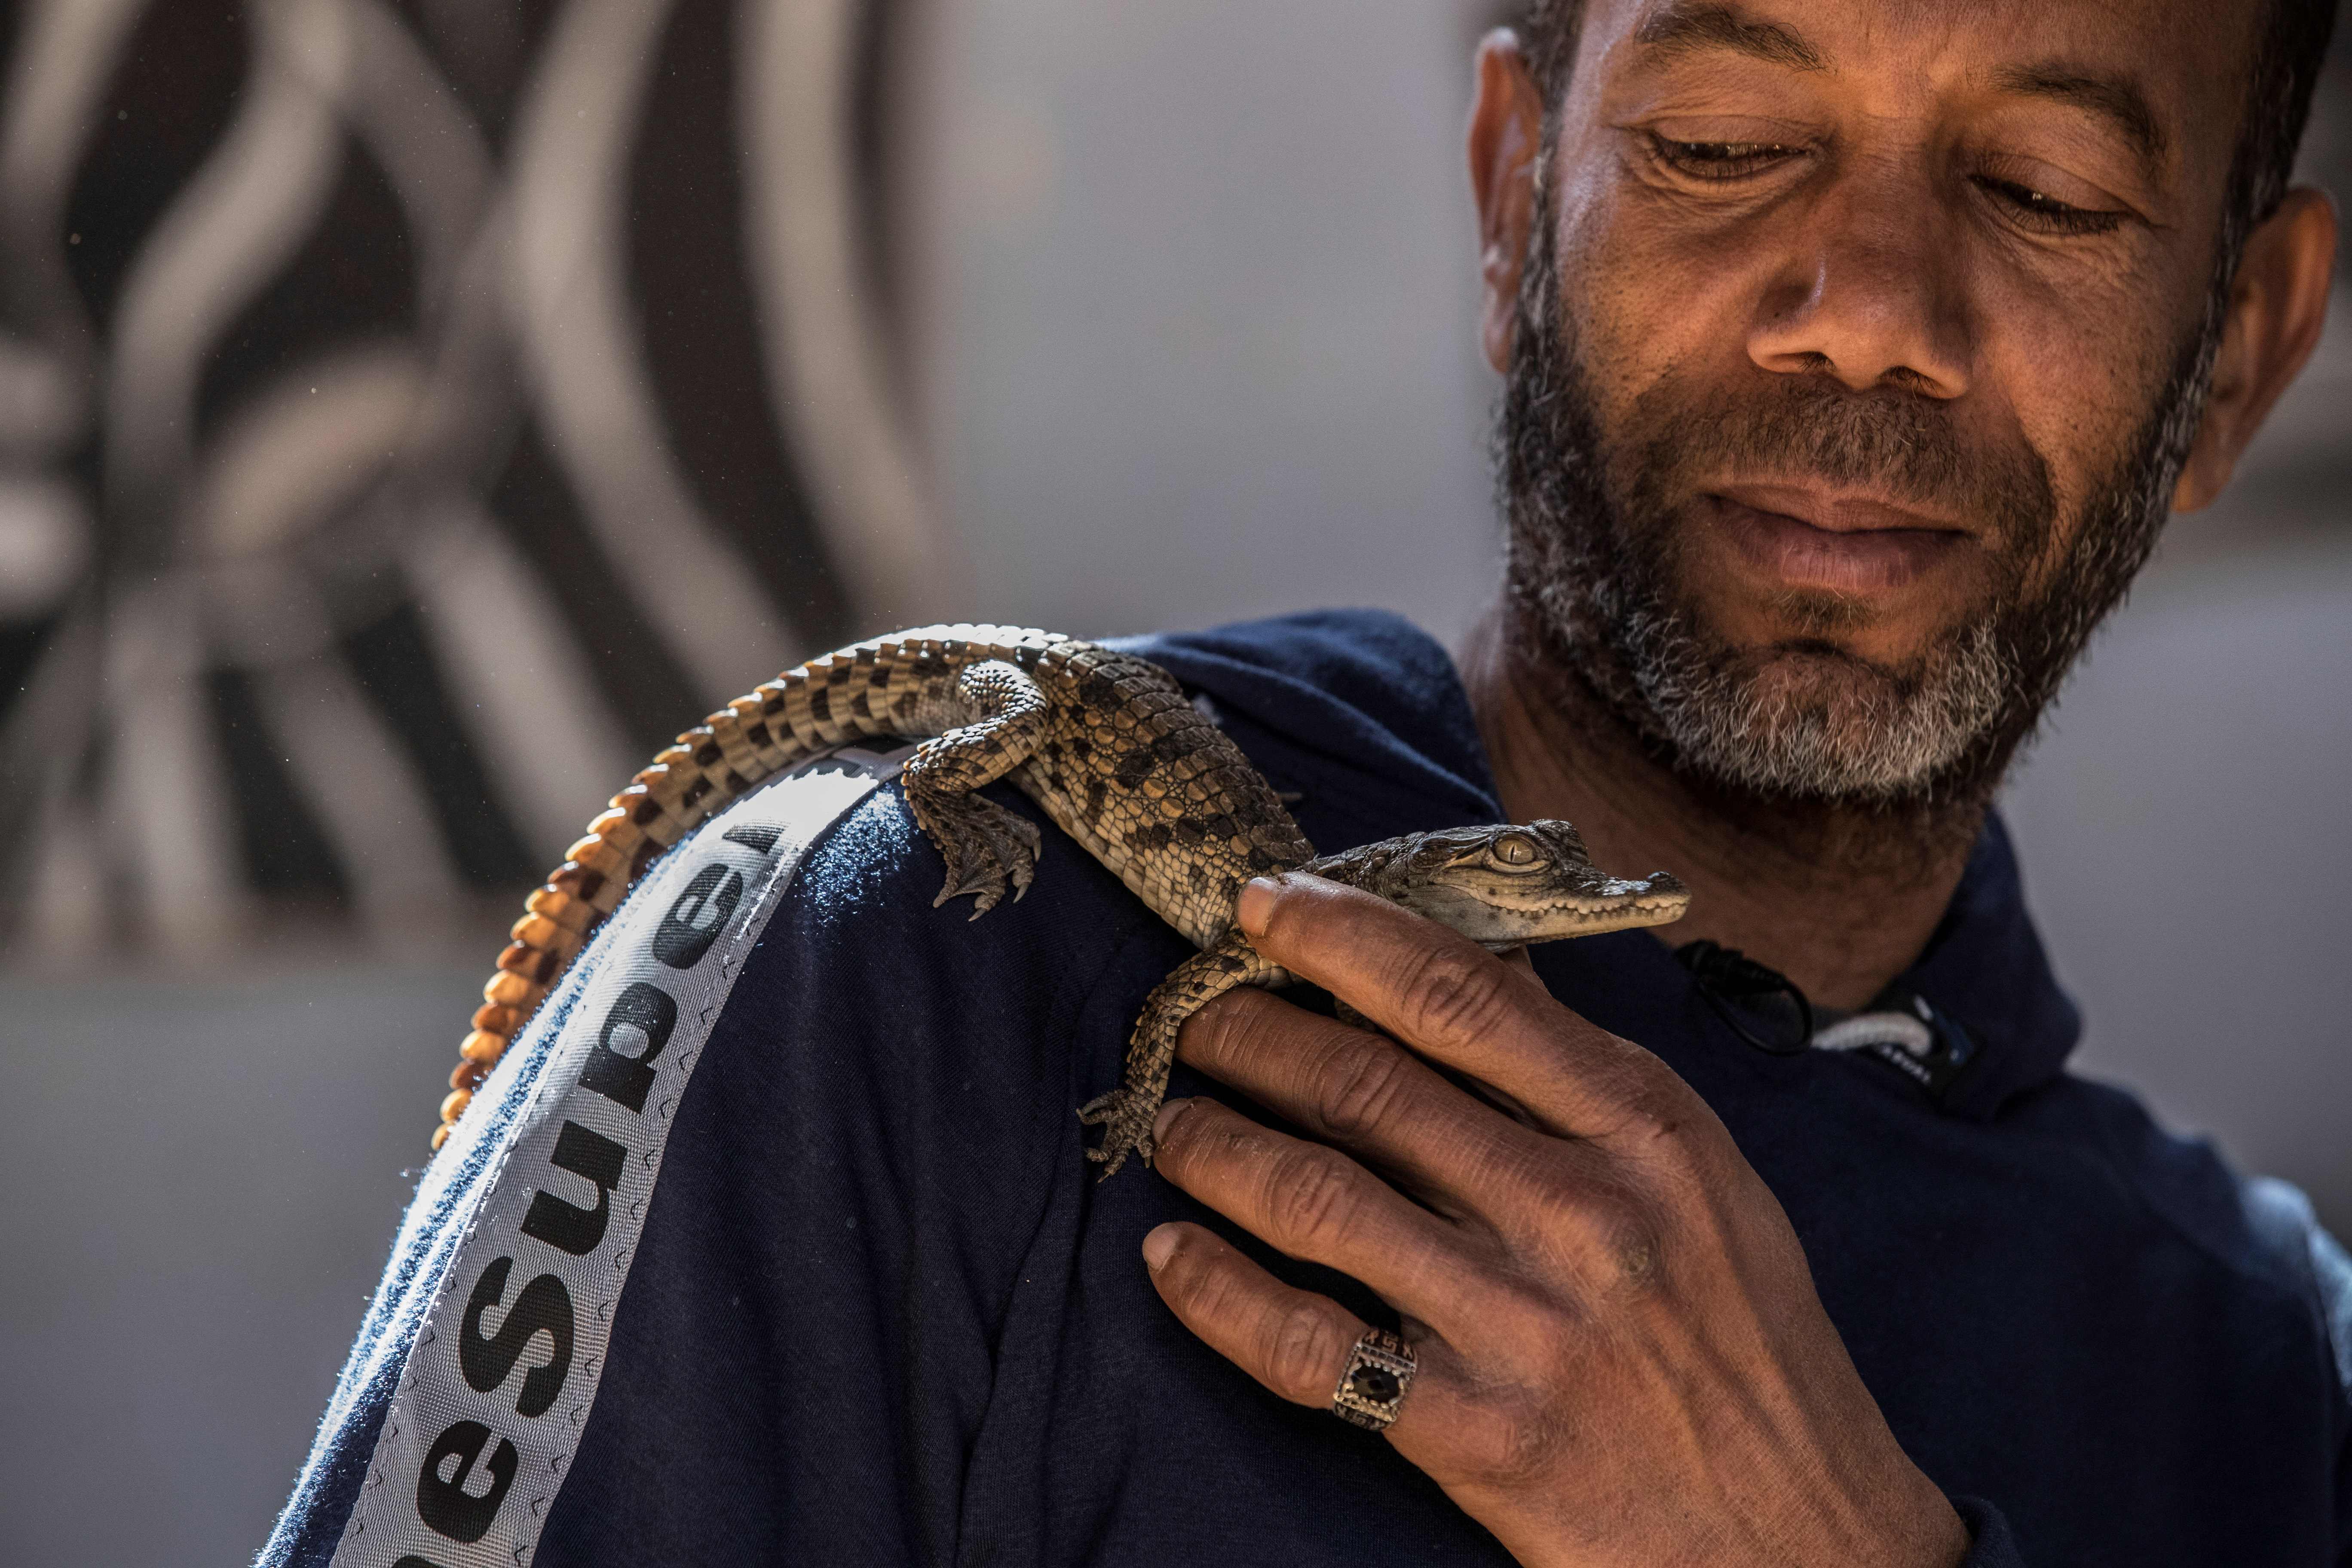 A baby crocodile sits on Mamdouh Hassan's shoulder